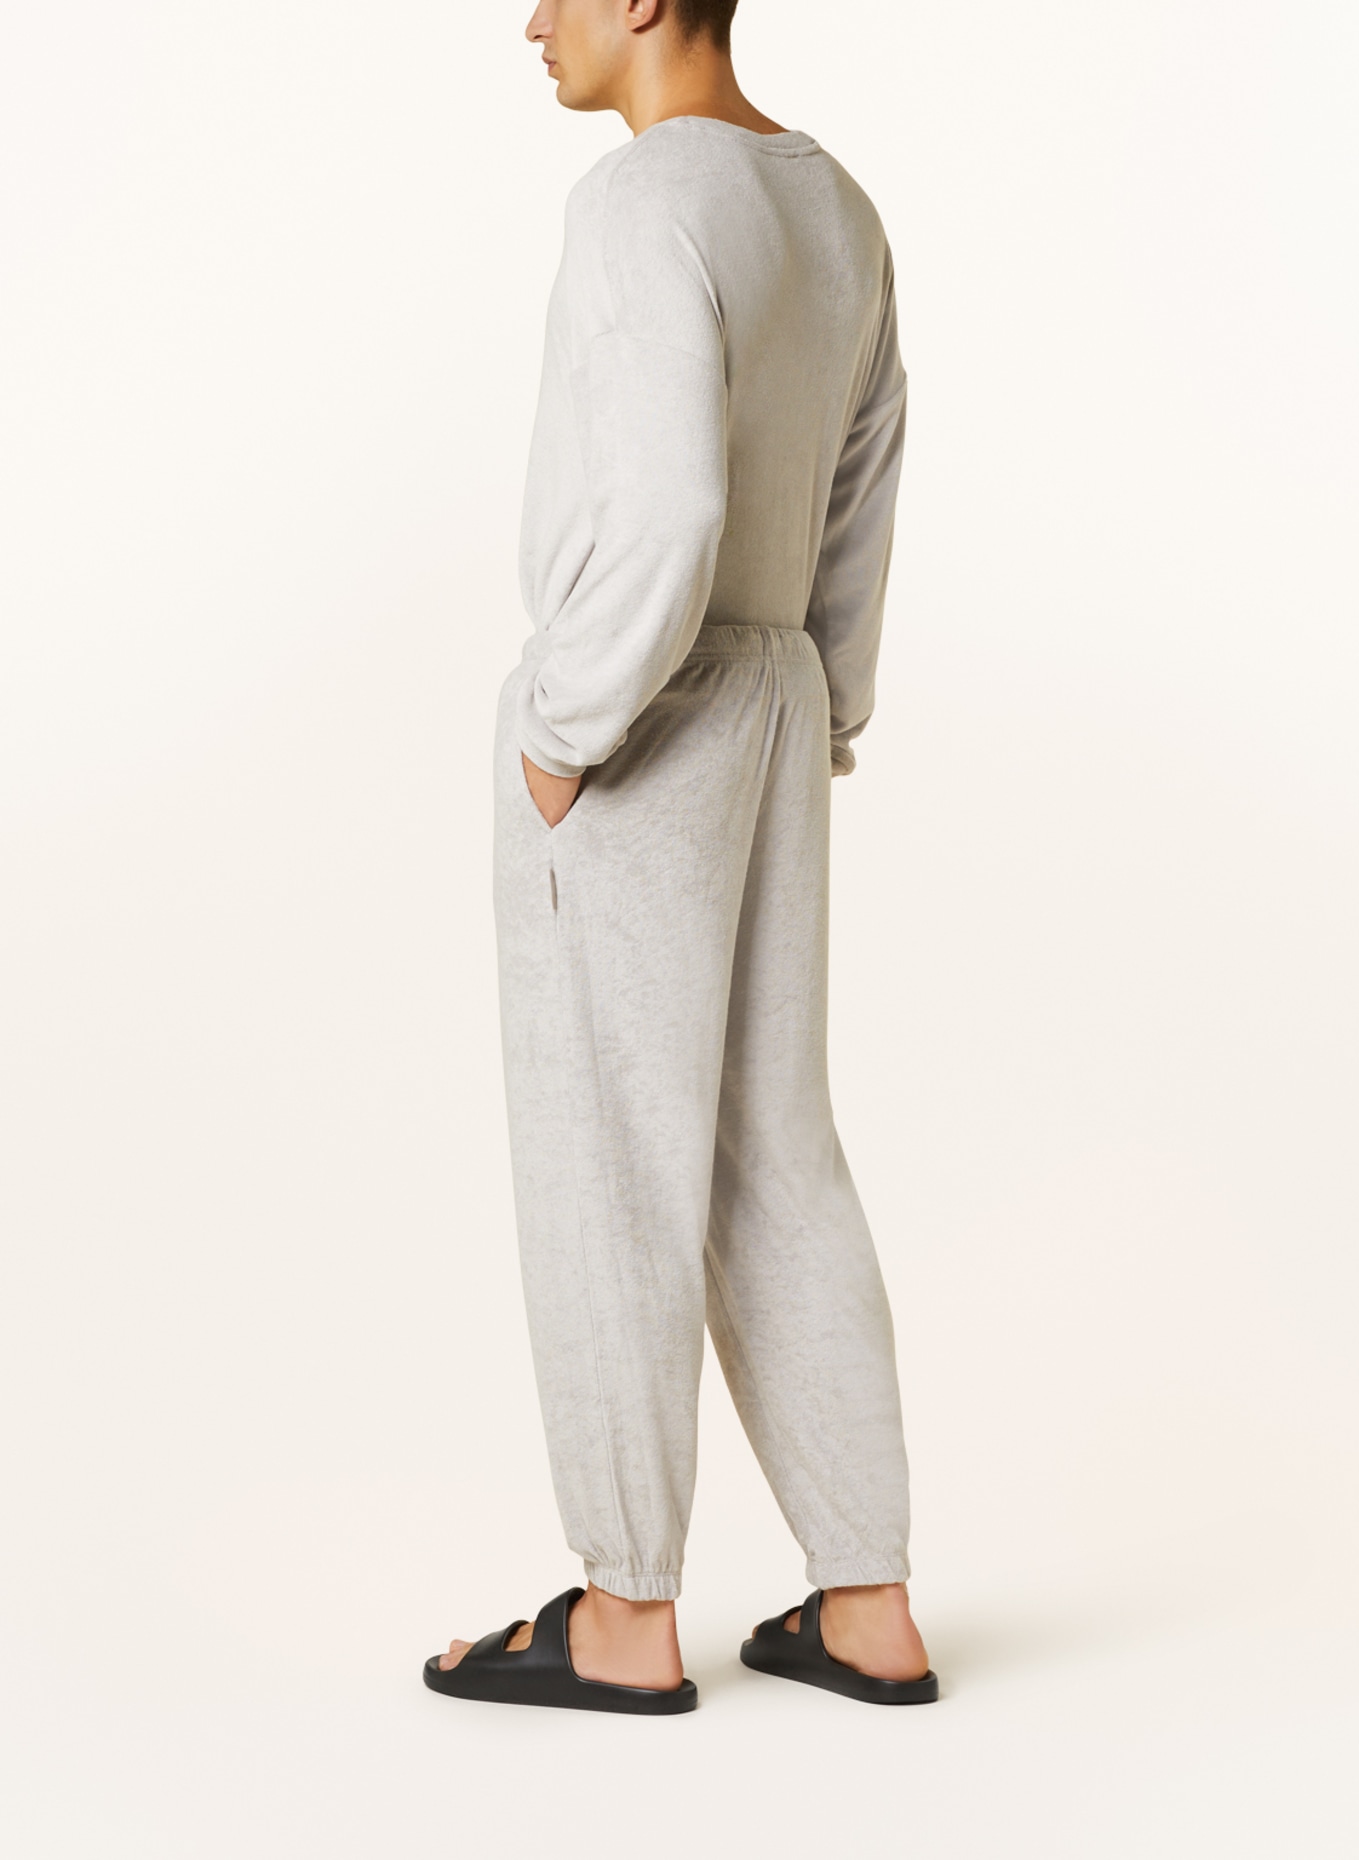 Calvin Klein Lounge pants made of terry cloth, Color: LIGHT GRAY (Image 3)